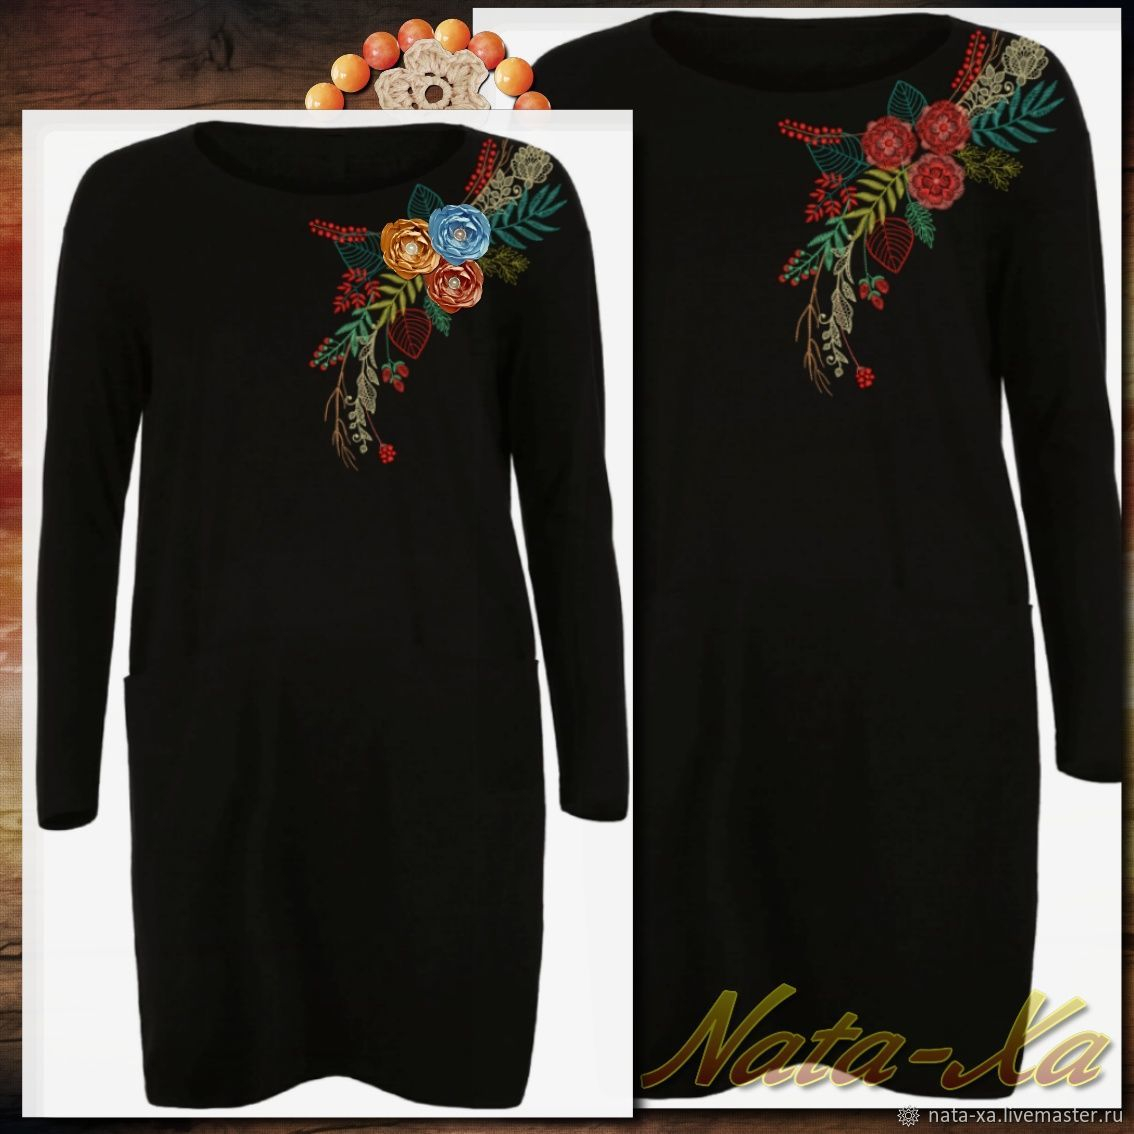 Hand Embroidery Patterns For Dresses Hand Embroidery Designs On Shirts Azrbaycan Dillr Universiteti